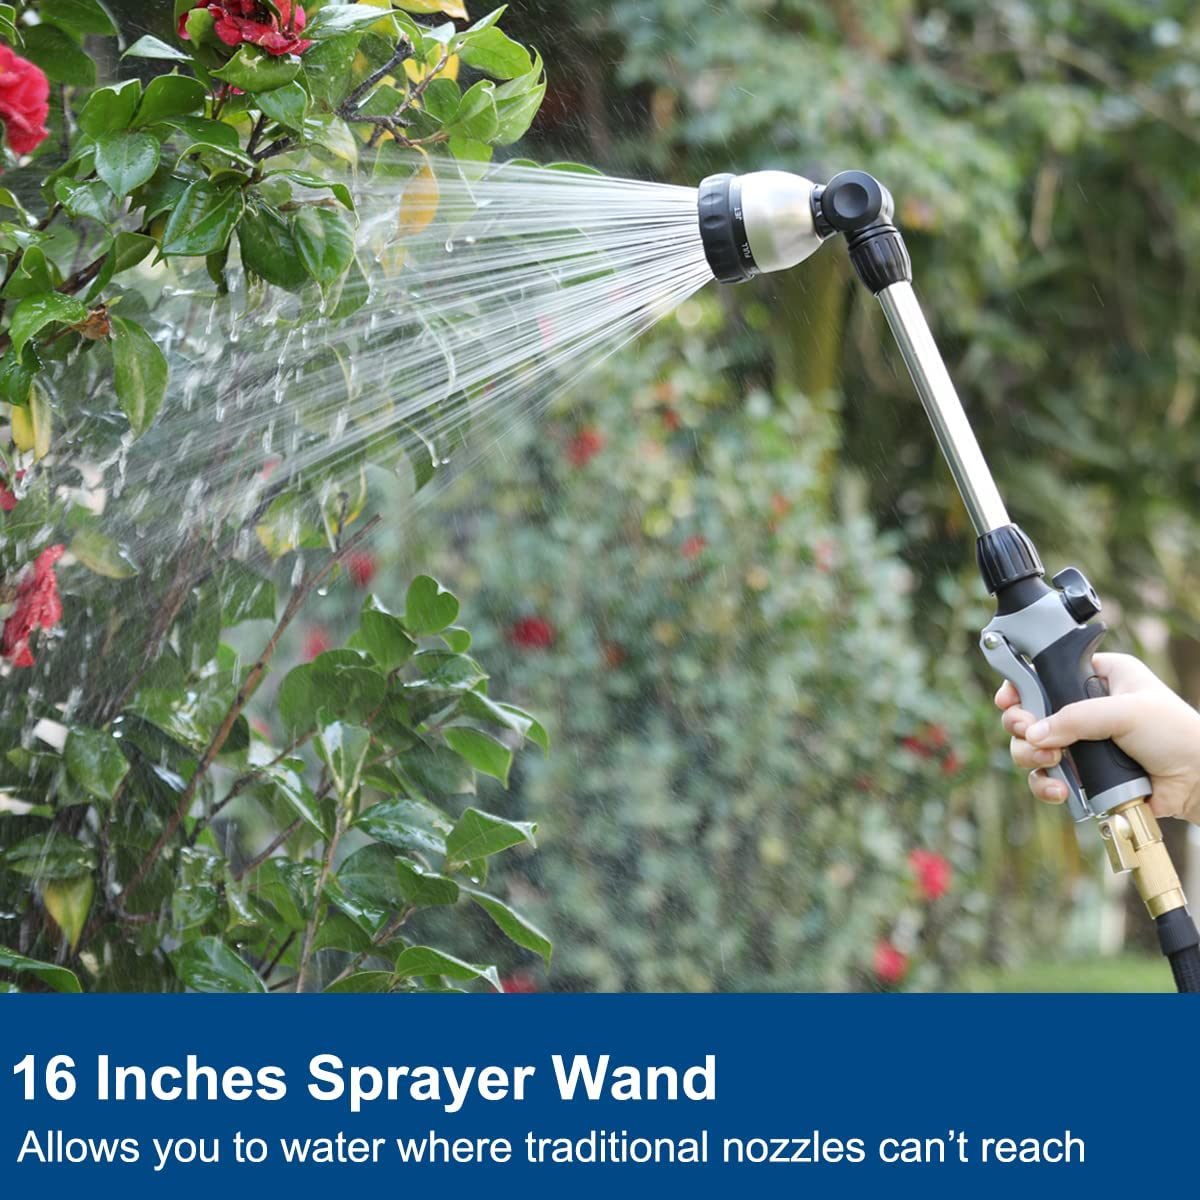 FANHAO Watering Wand Heavy Duty,16 Inches Metal Garden Hose Wand with 8 Spray Patterns